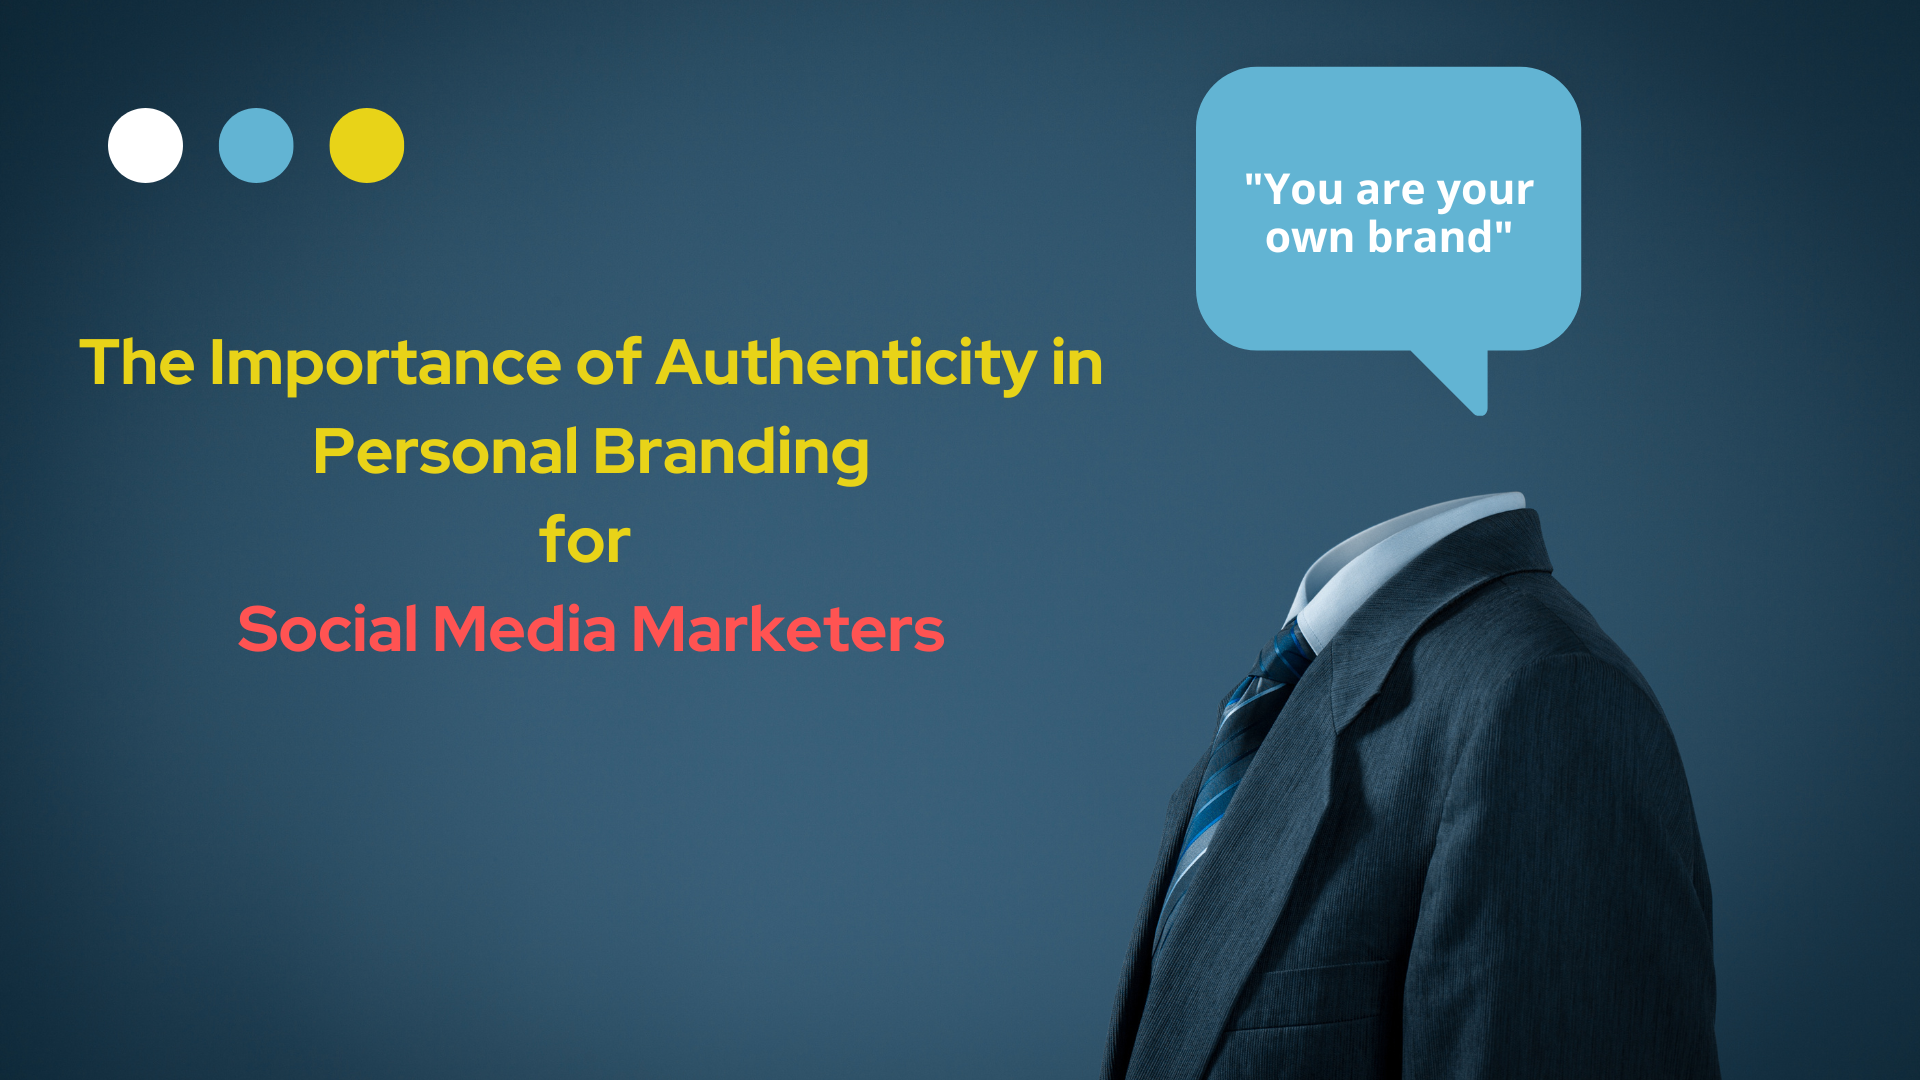 The Importance of Authenticity in Personal Branding for Social Media Marketers